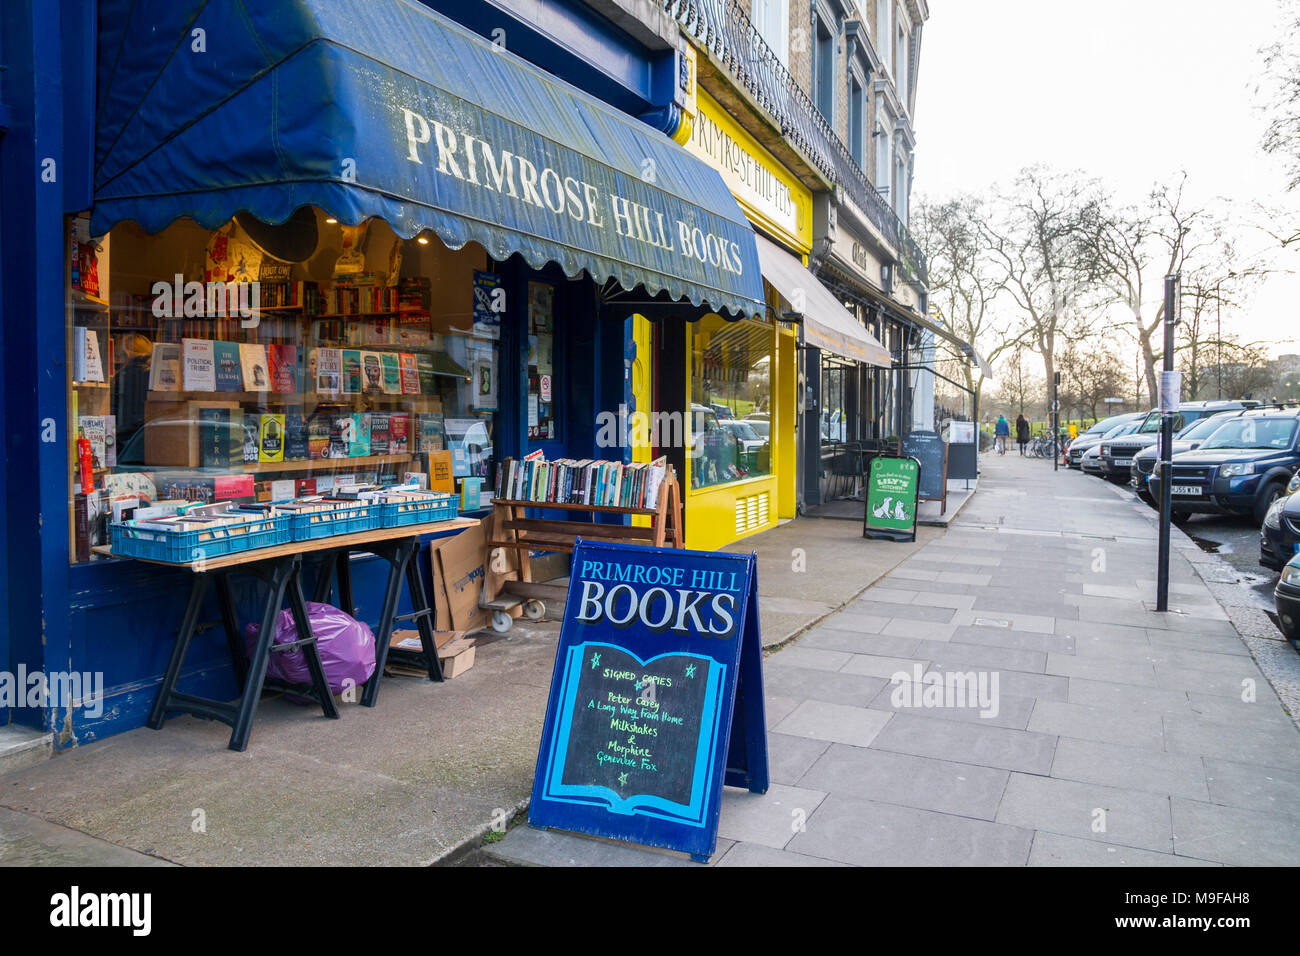 Primrose Hill Books, traditional bookshop, bookstore book shop with crates of secondhand books outside stacked, London UK learning knowledge education Stock Photo